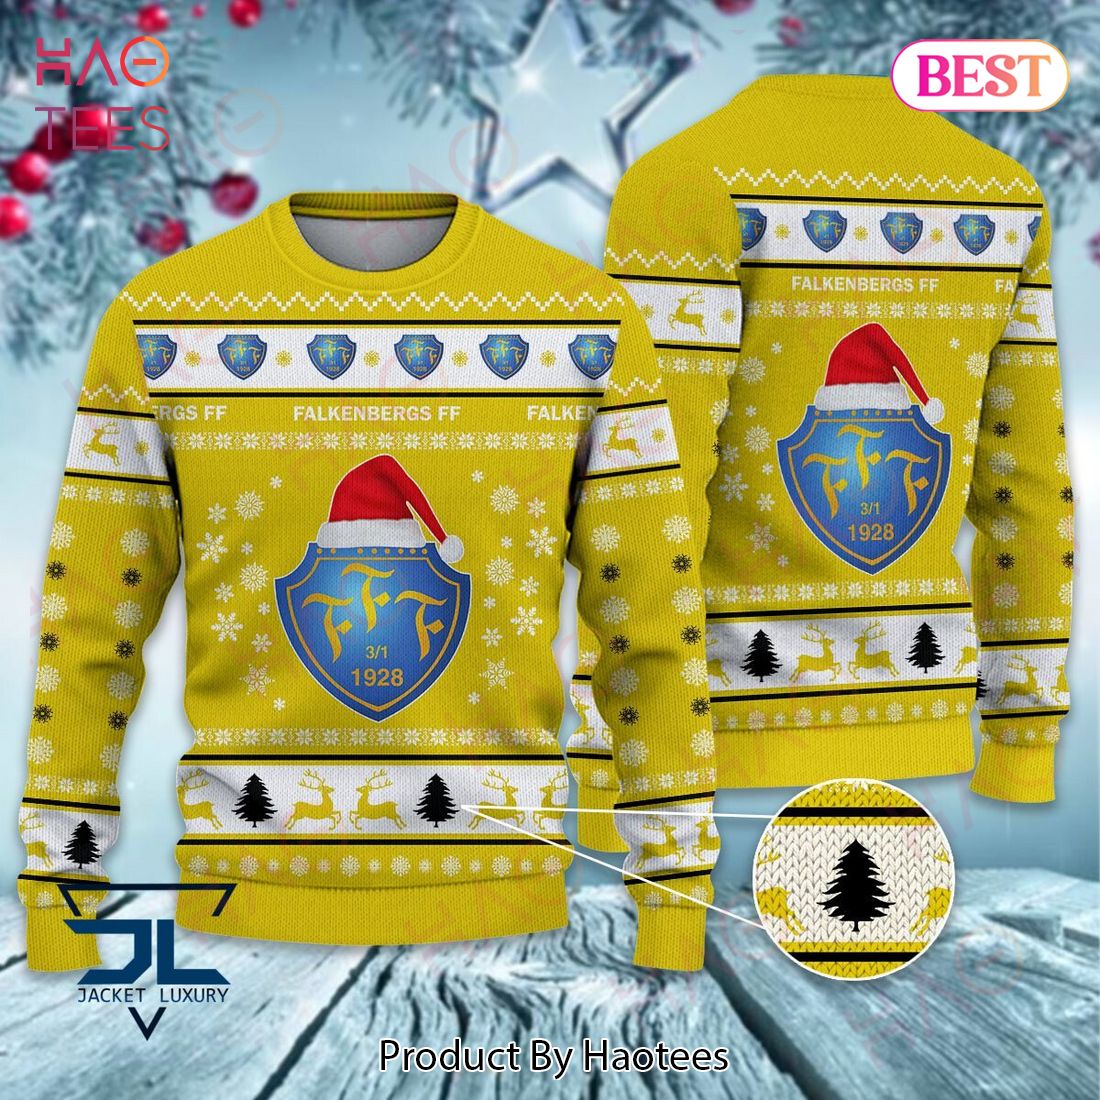 BEST Falkenbergs FF Christmas Luxury Brand Sweater Limited Edition